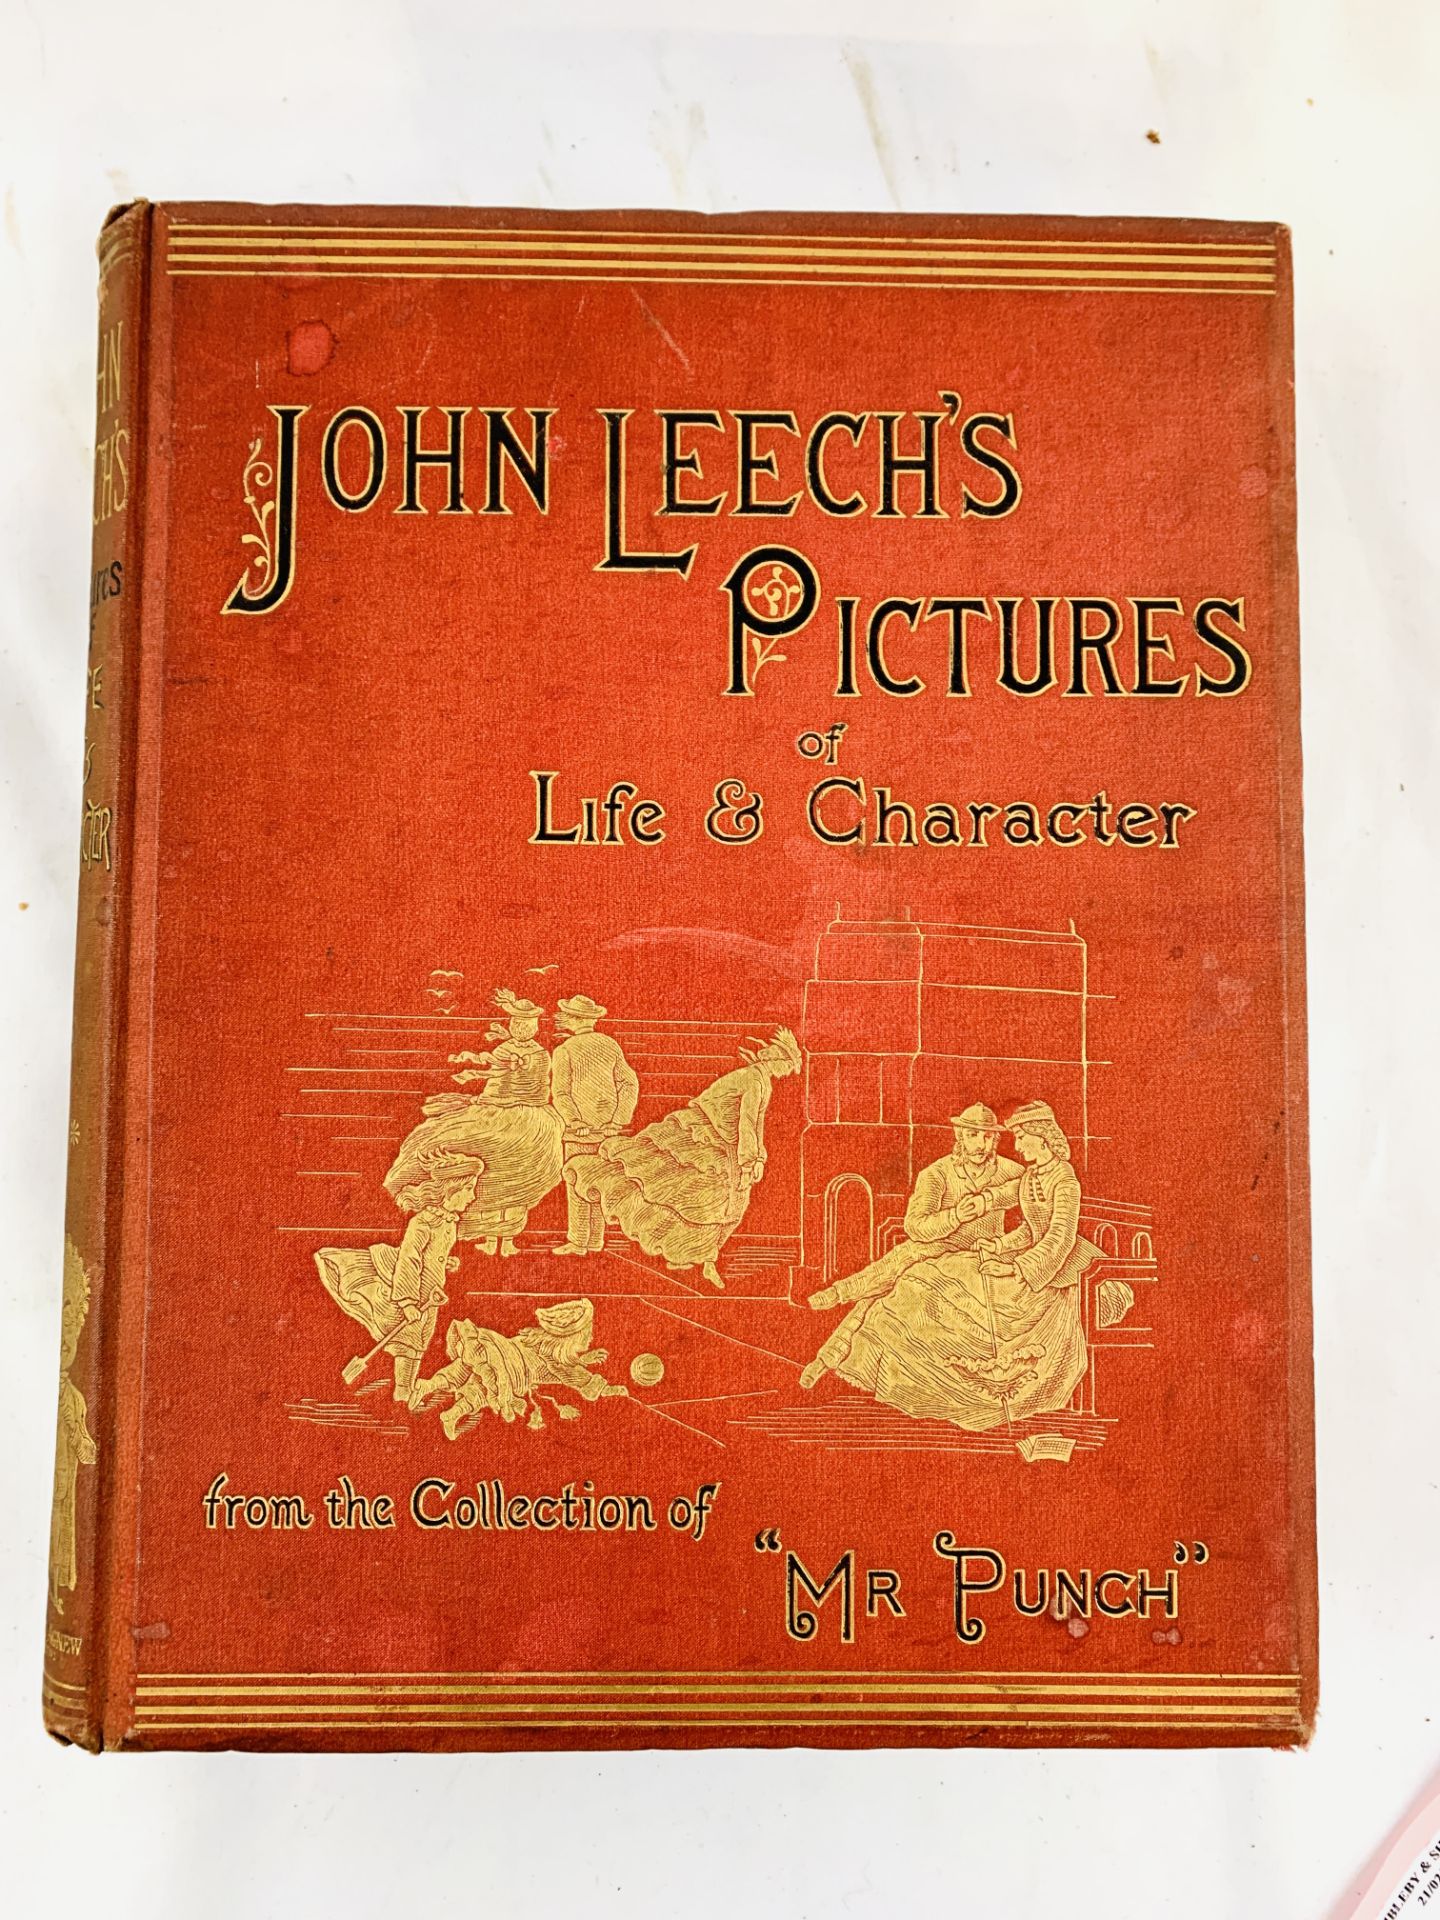 Pictures of Life and Character, 1886-1887, John Leech.